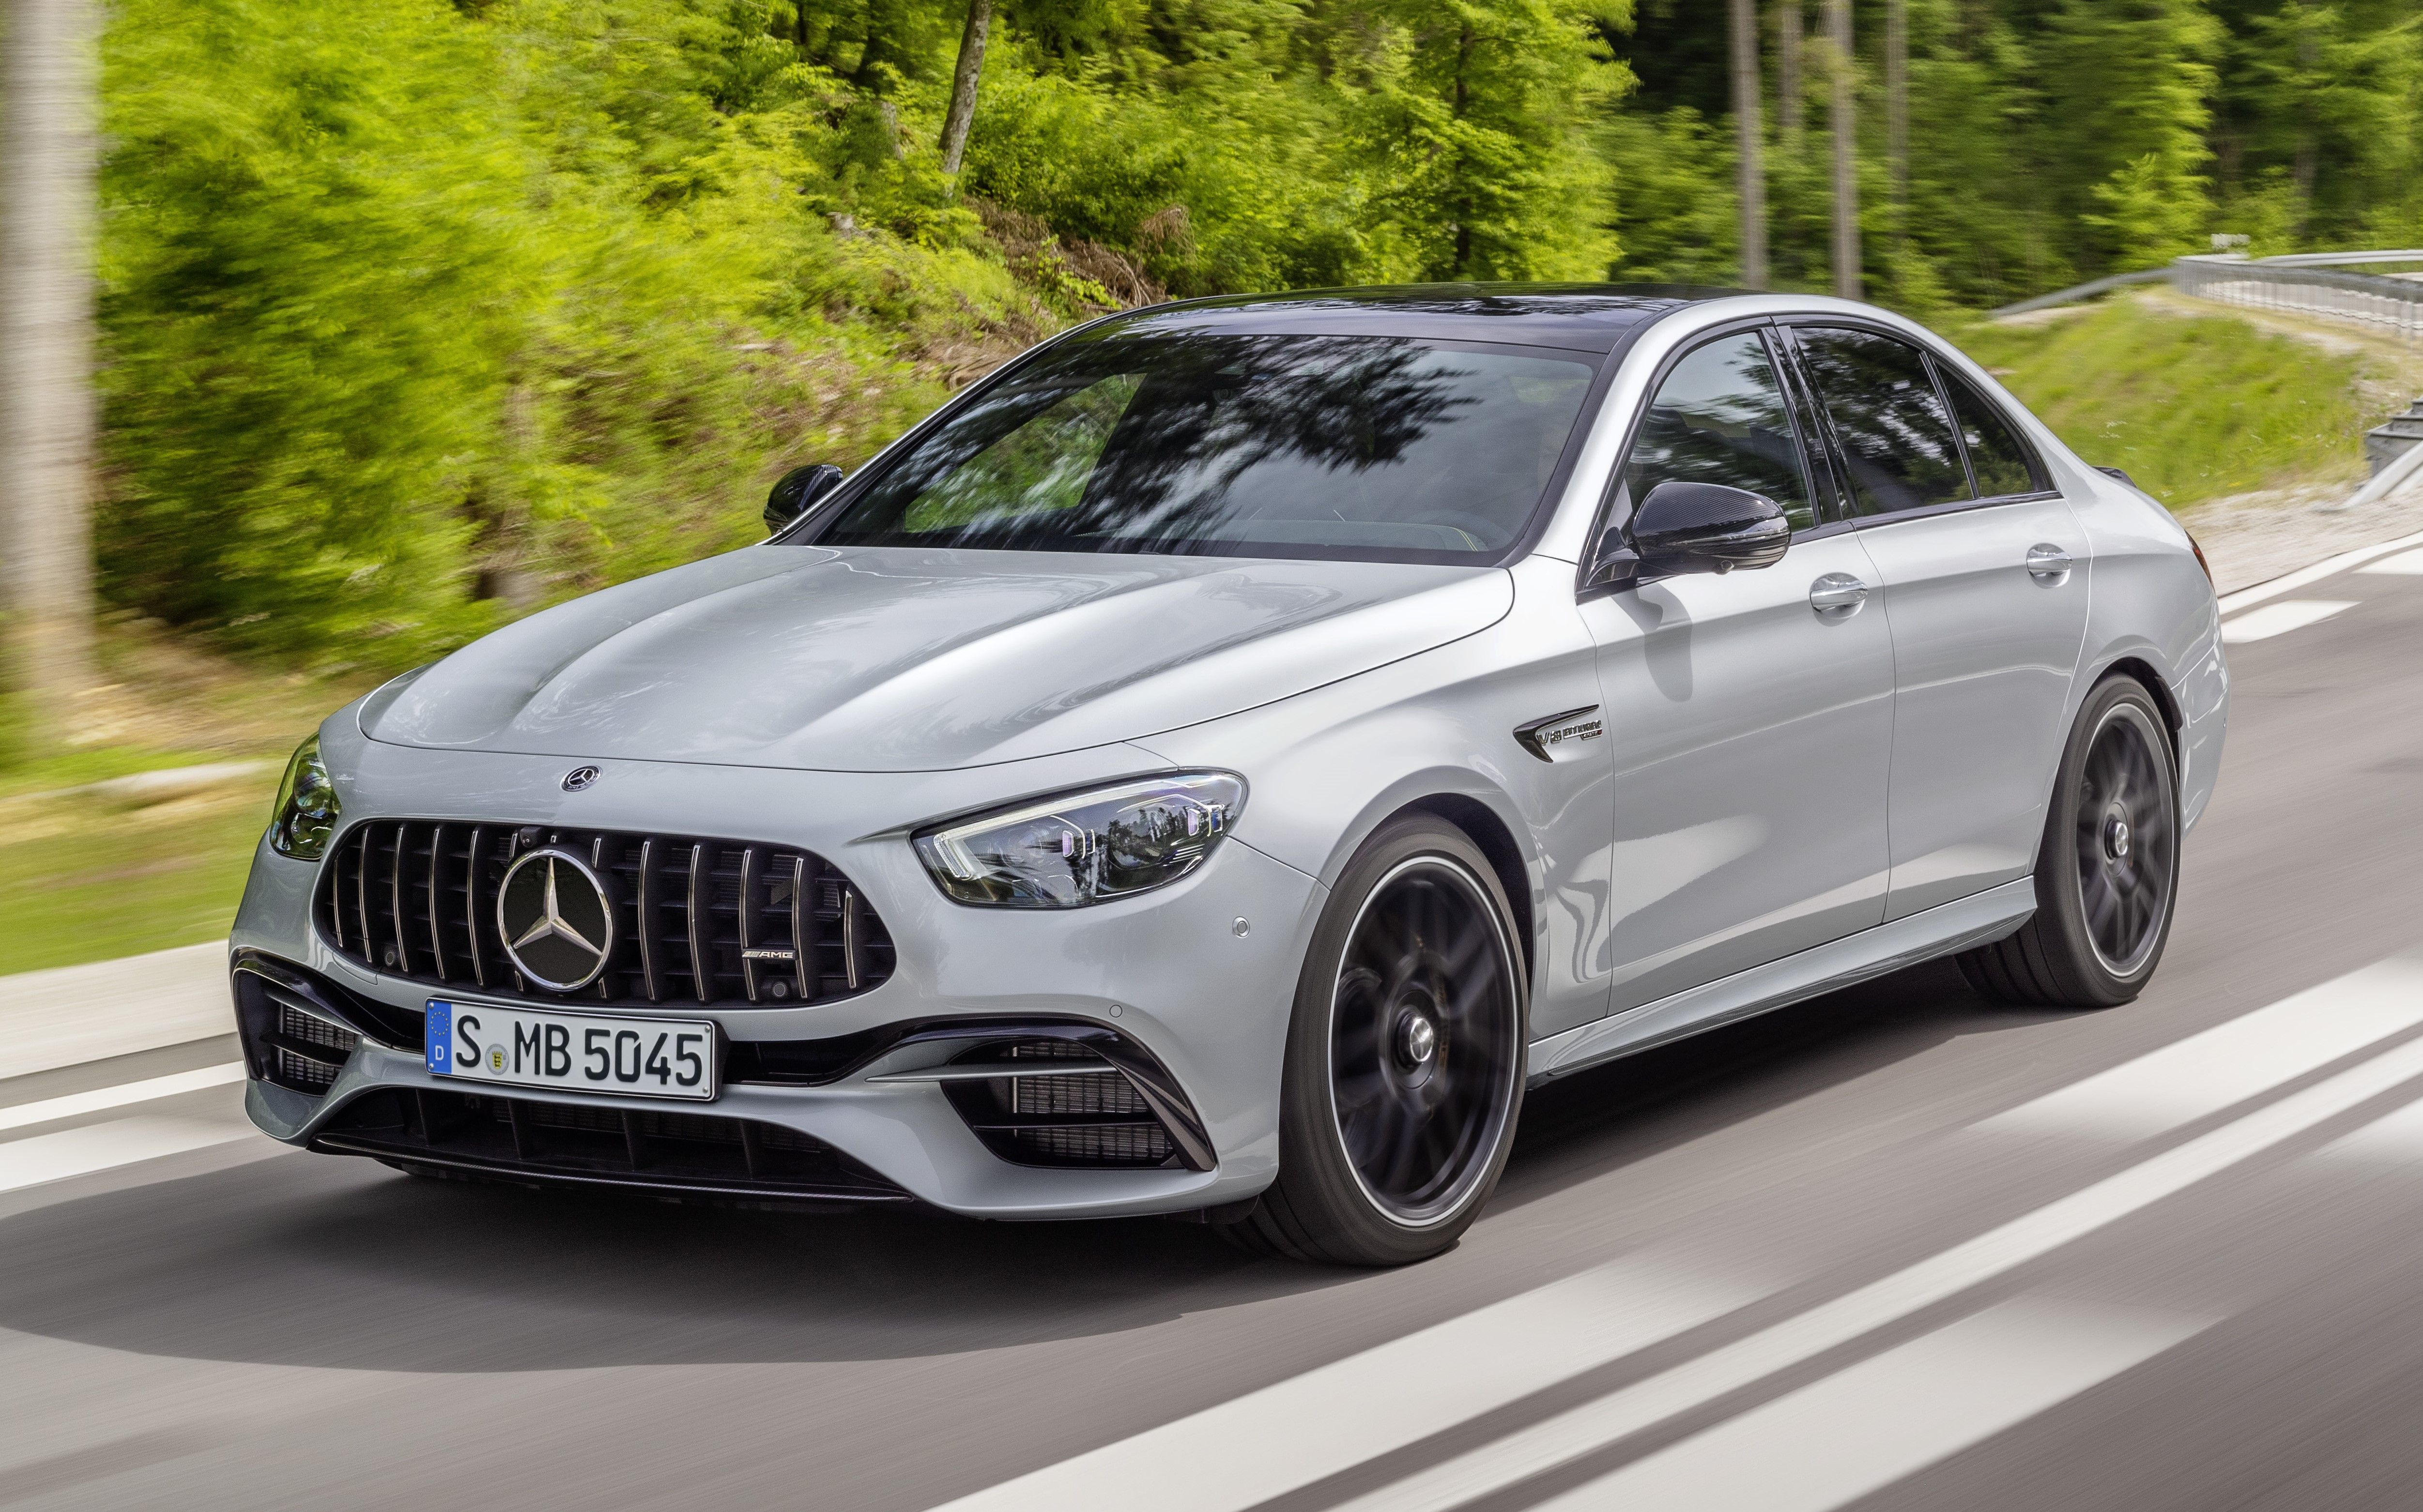 Silver 2023 Mercedes-AMG E63 S driven on the road